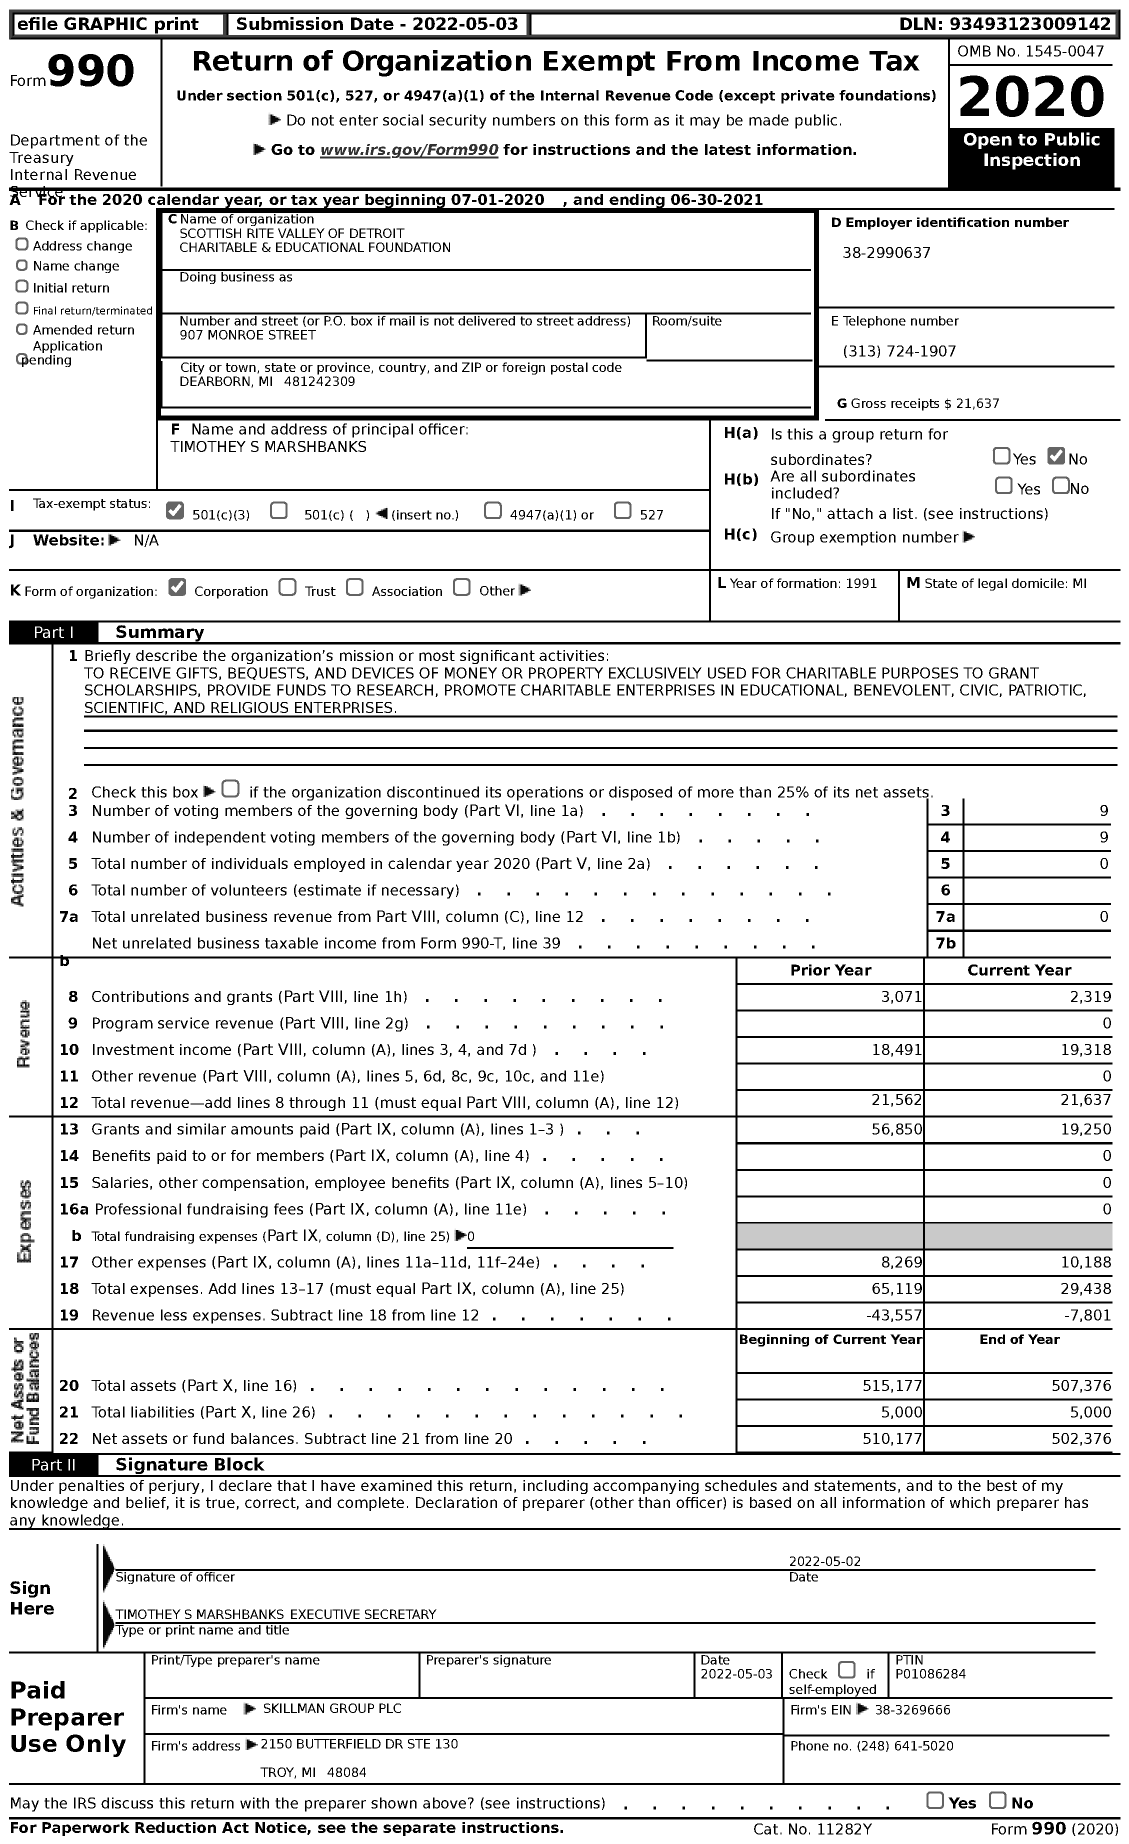 Image of first page of 2020 Form 990 for Scottish Rite Valley of Detroit Charitable and Educational Foundation